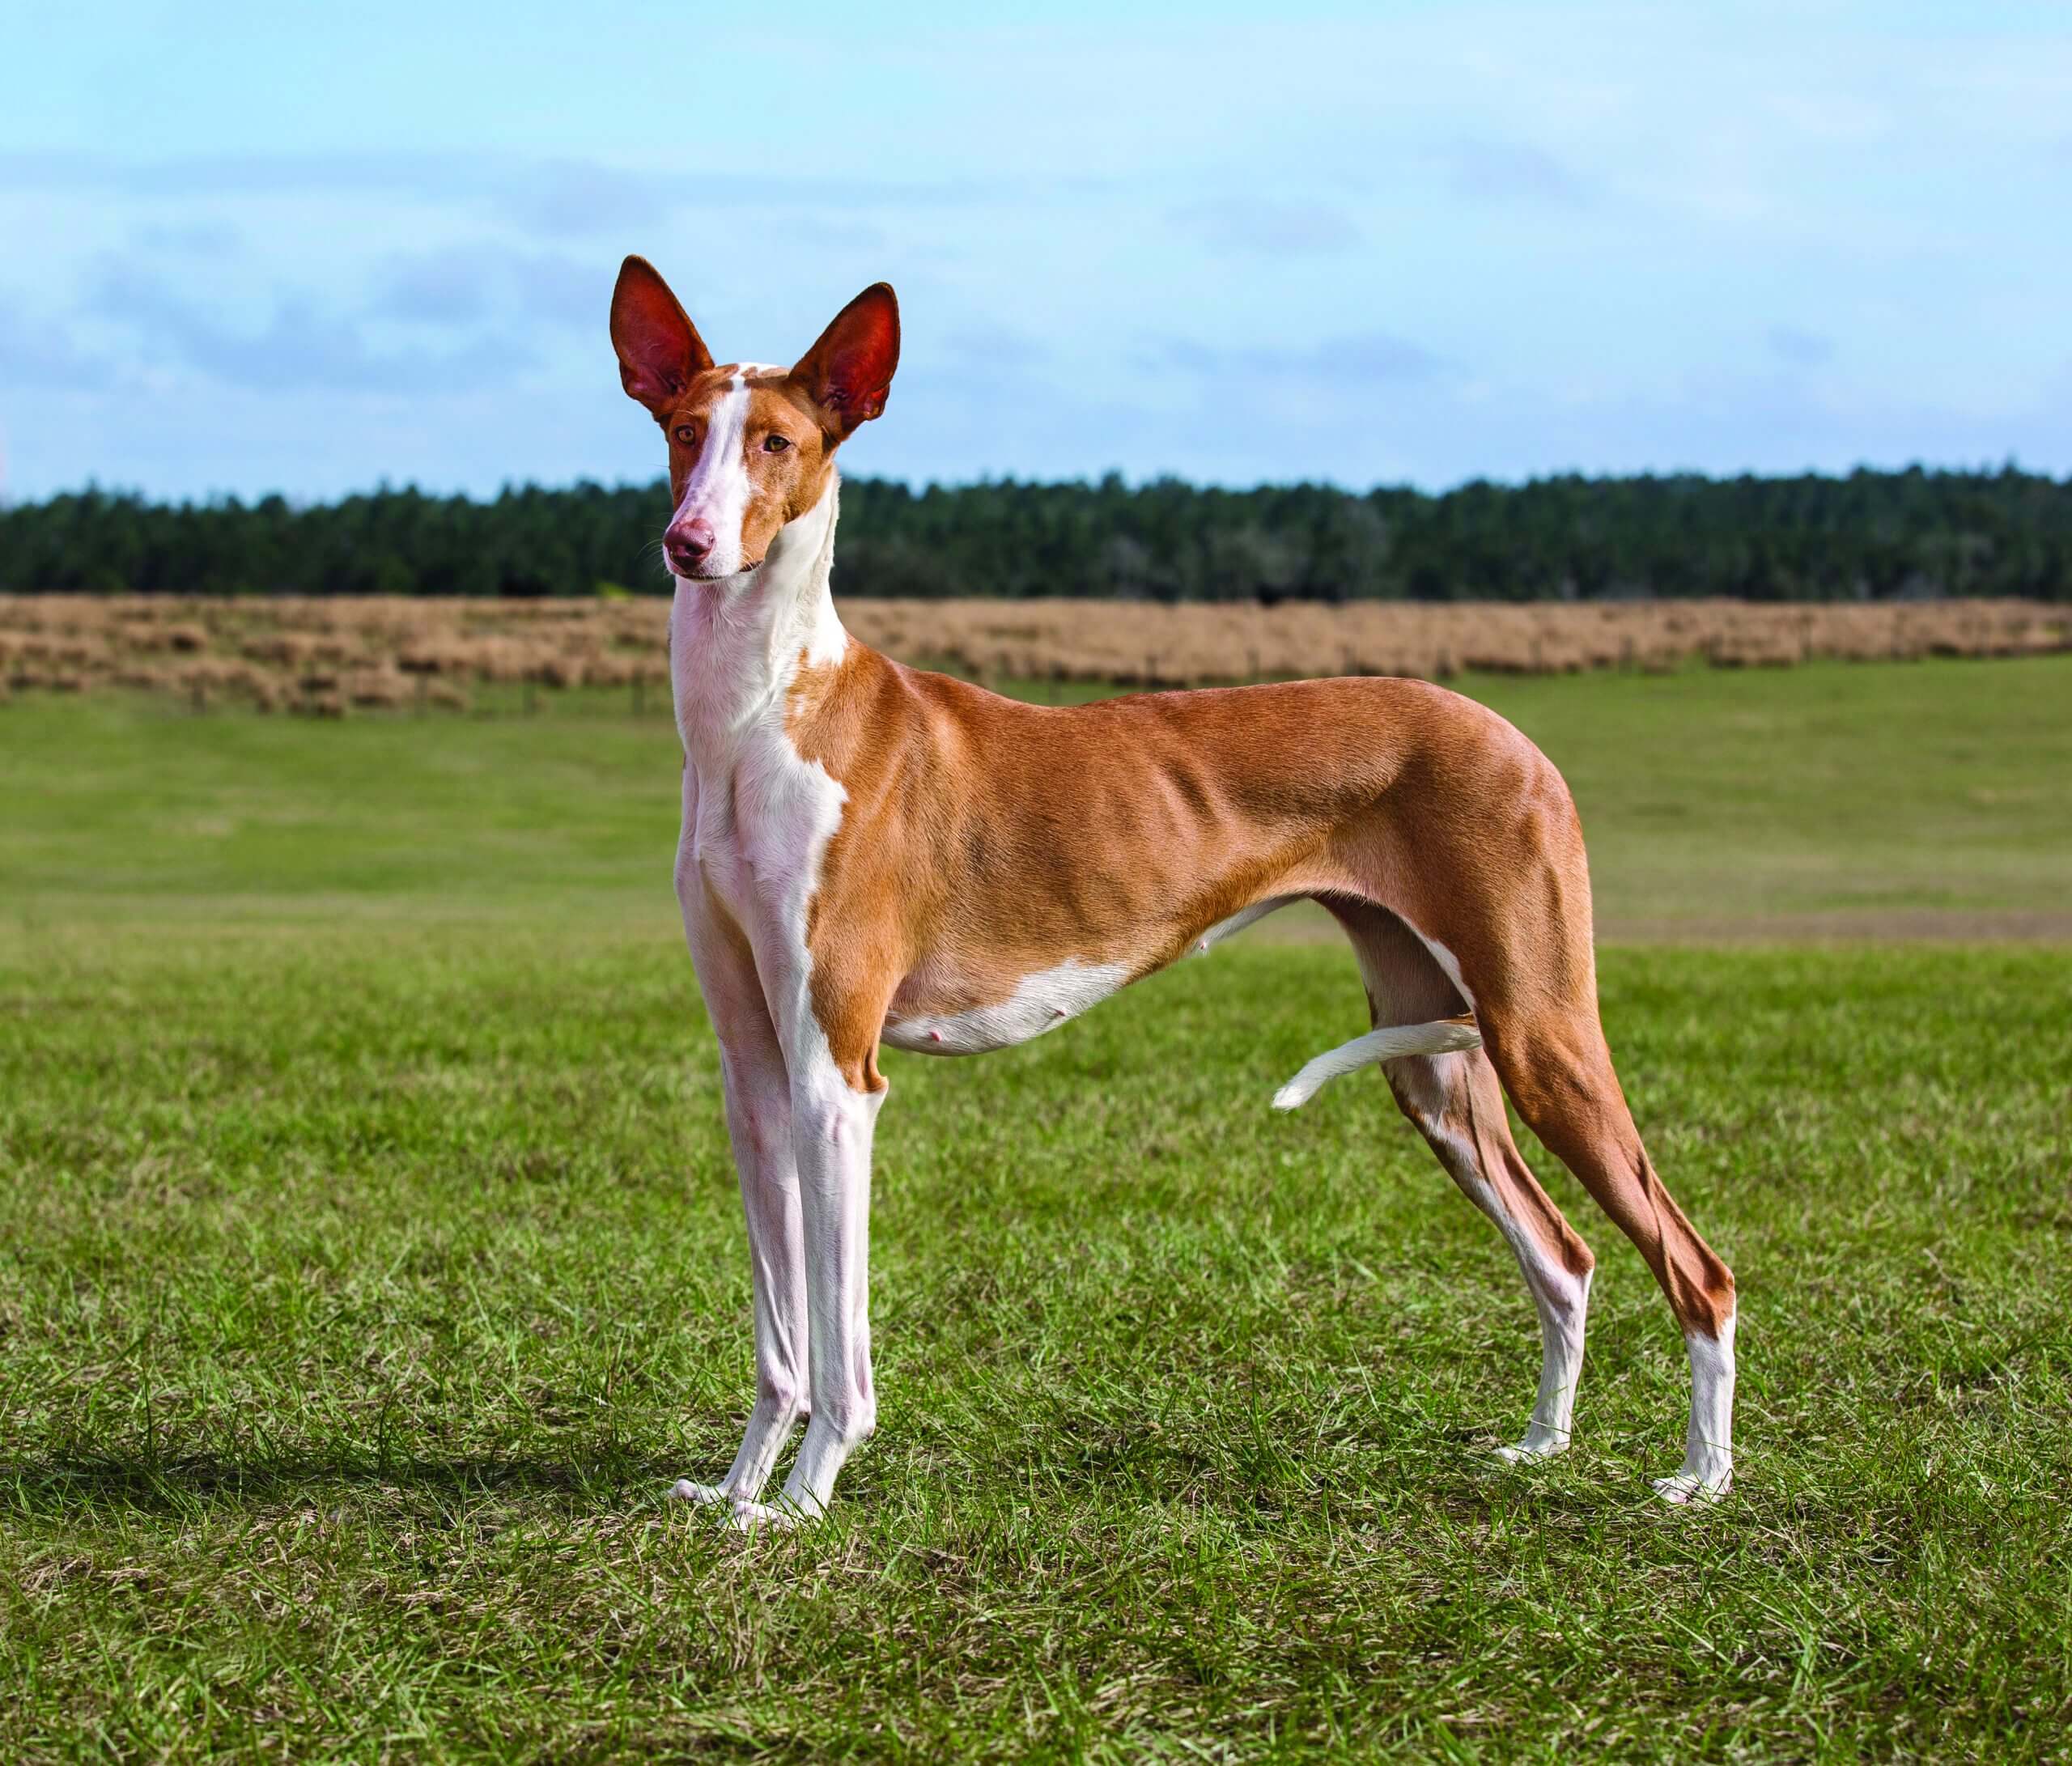 A copper and white Ibizan Hound standing in the grass, with a forest in the background.